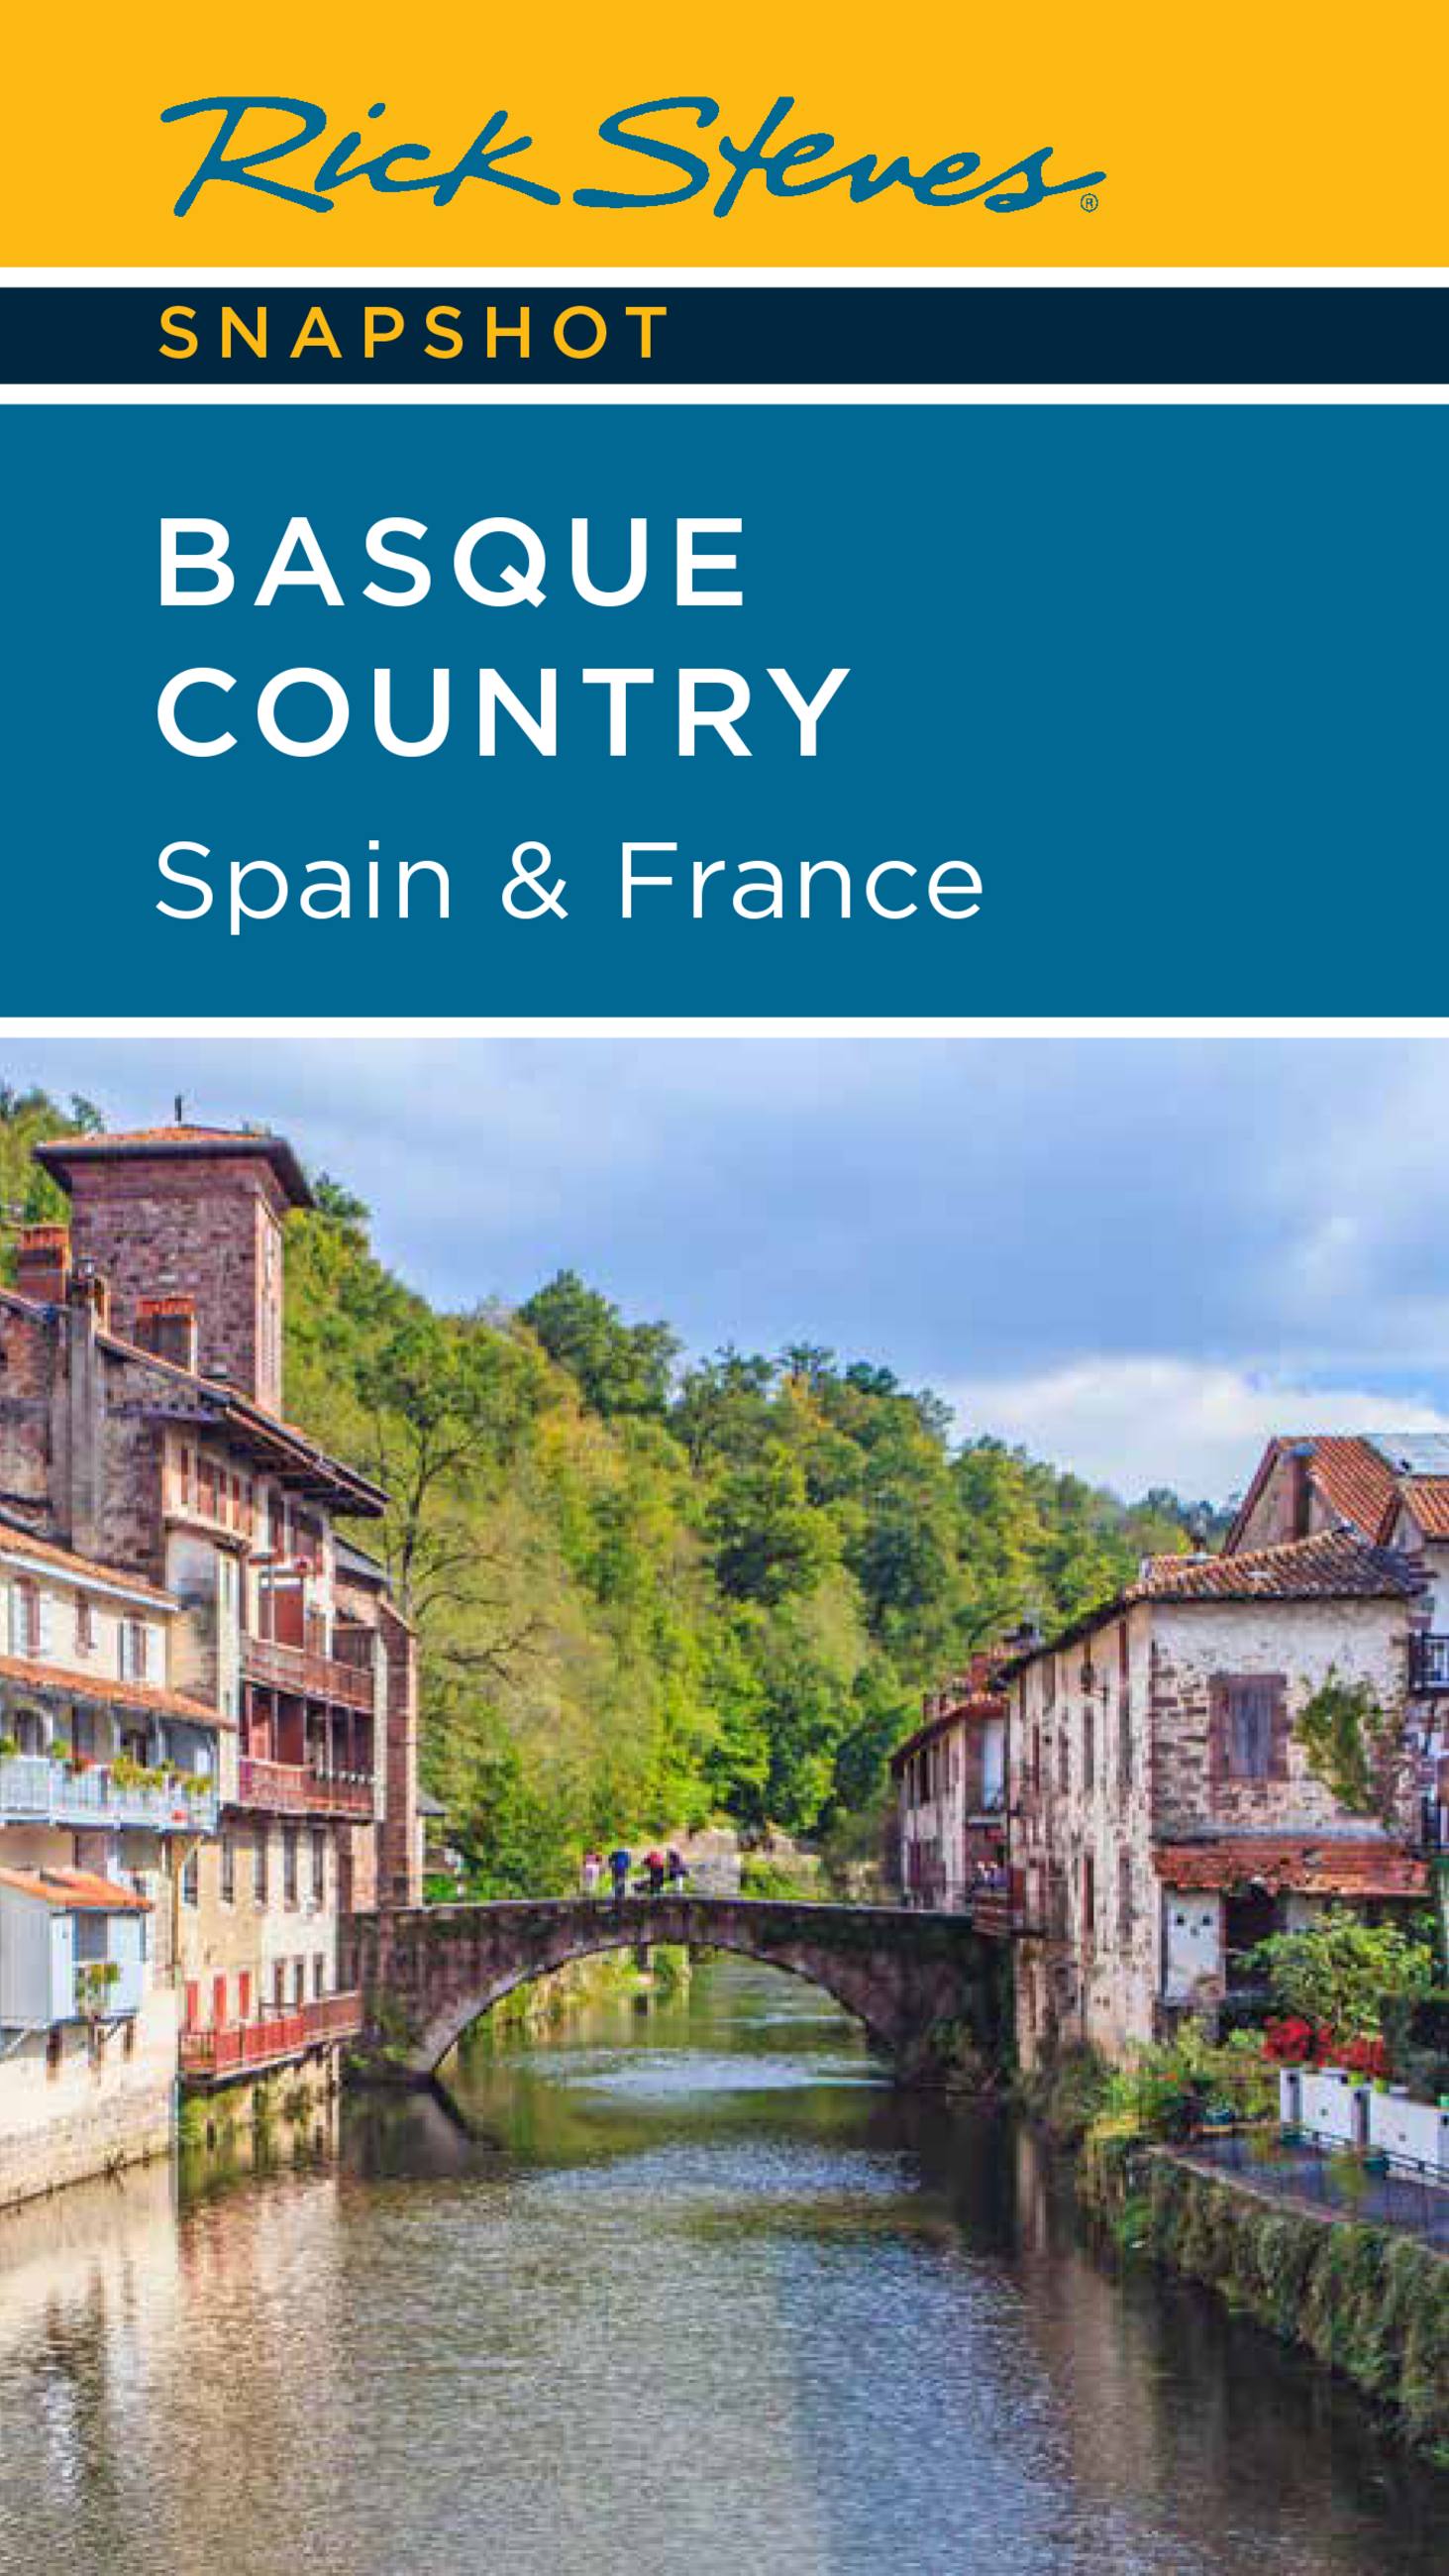 Rick Steves Snapshot Basque Country: Spain & France by Rick Steves |  Hachette Book Group